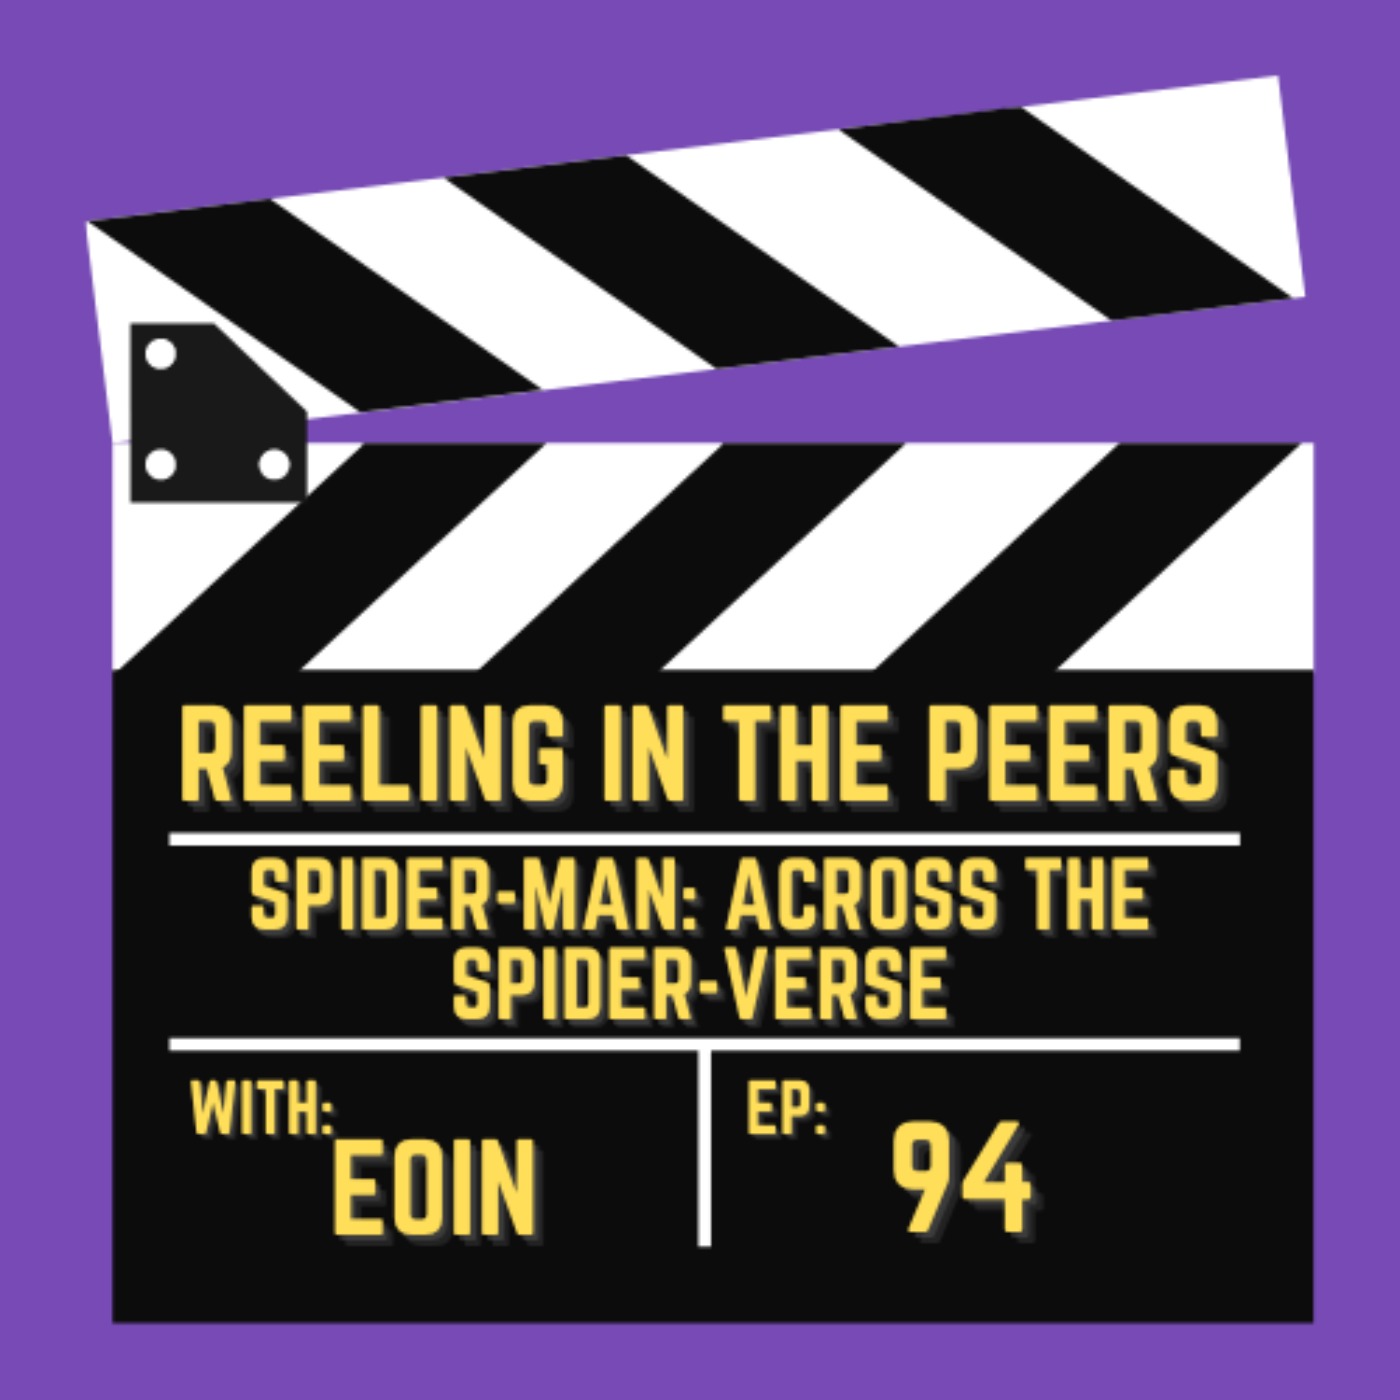 94 Spider-Man: Across the Spider-Verse w/ Eoin